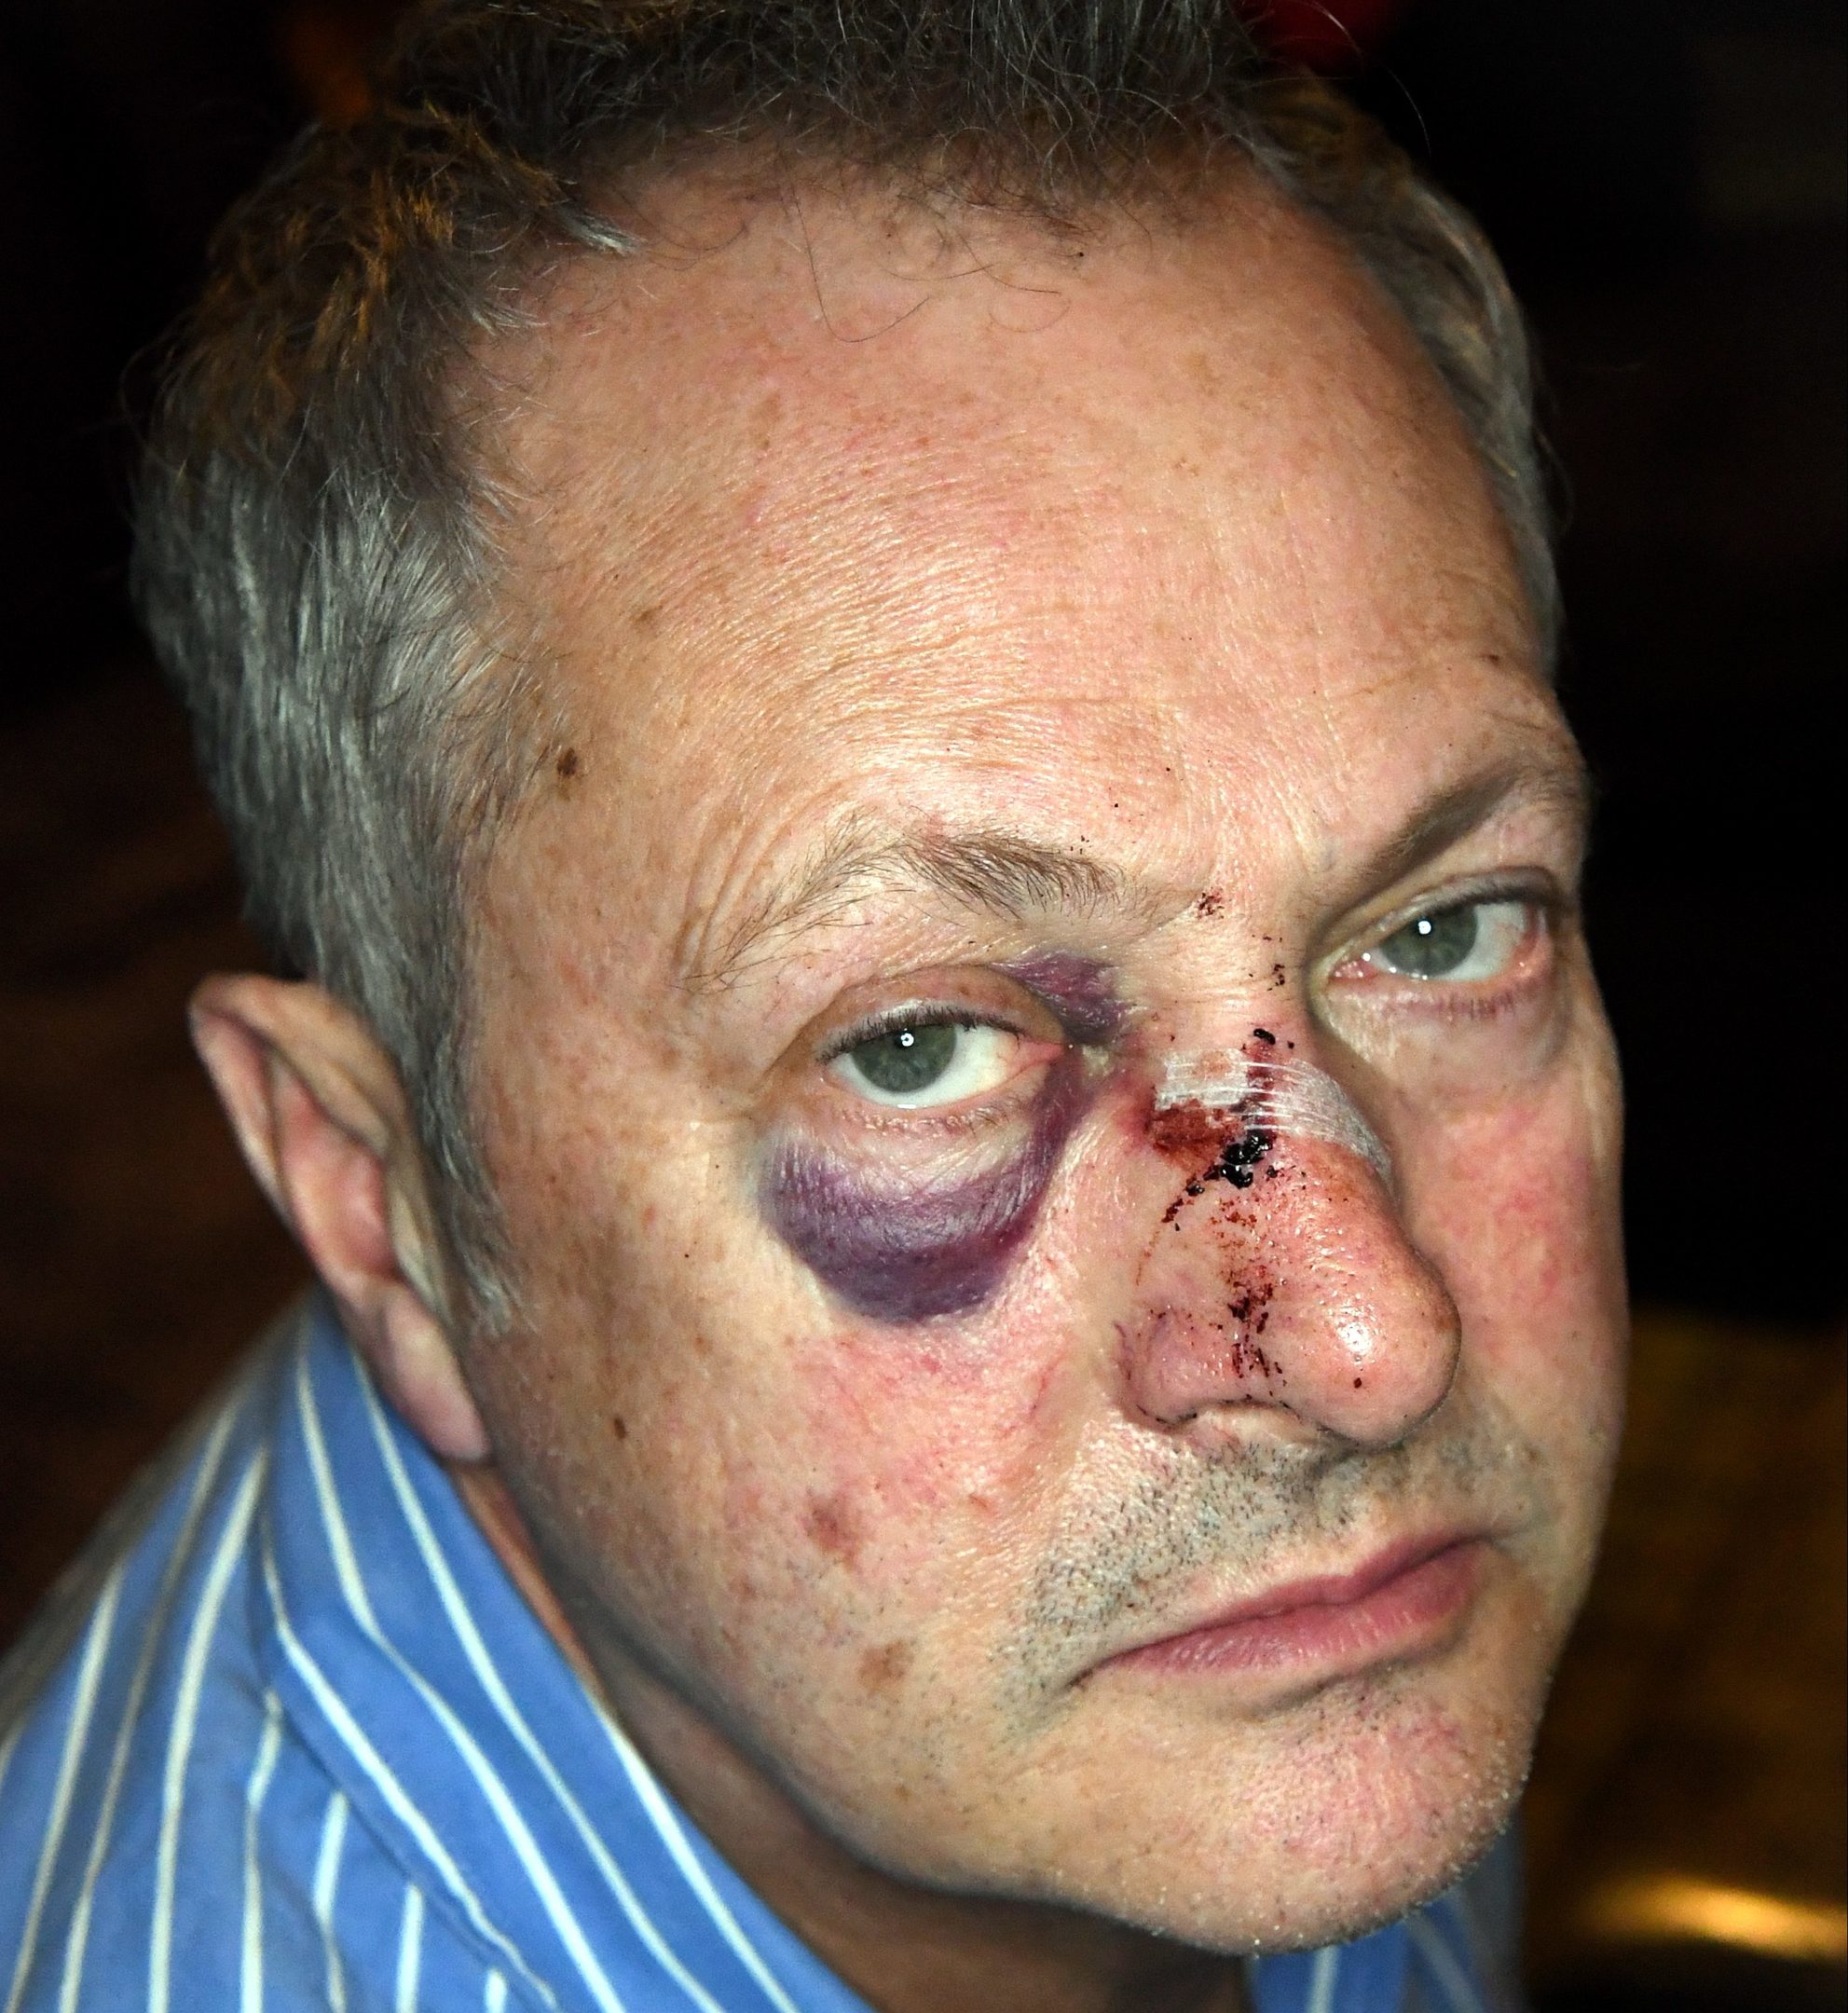 Chef Nick Nairn who was attacked on Union Street last night walking home from his cook school. (Kami Thomson)